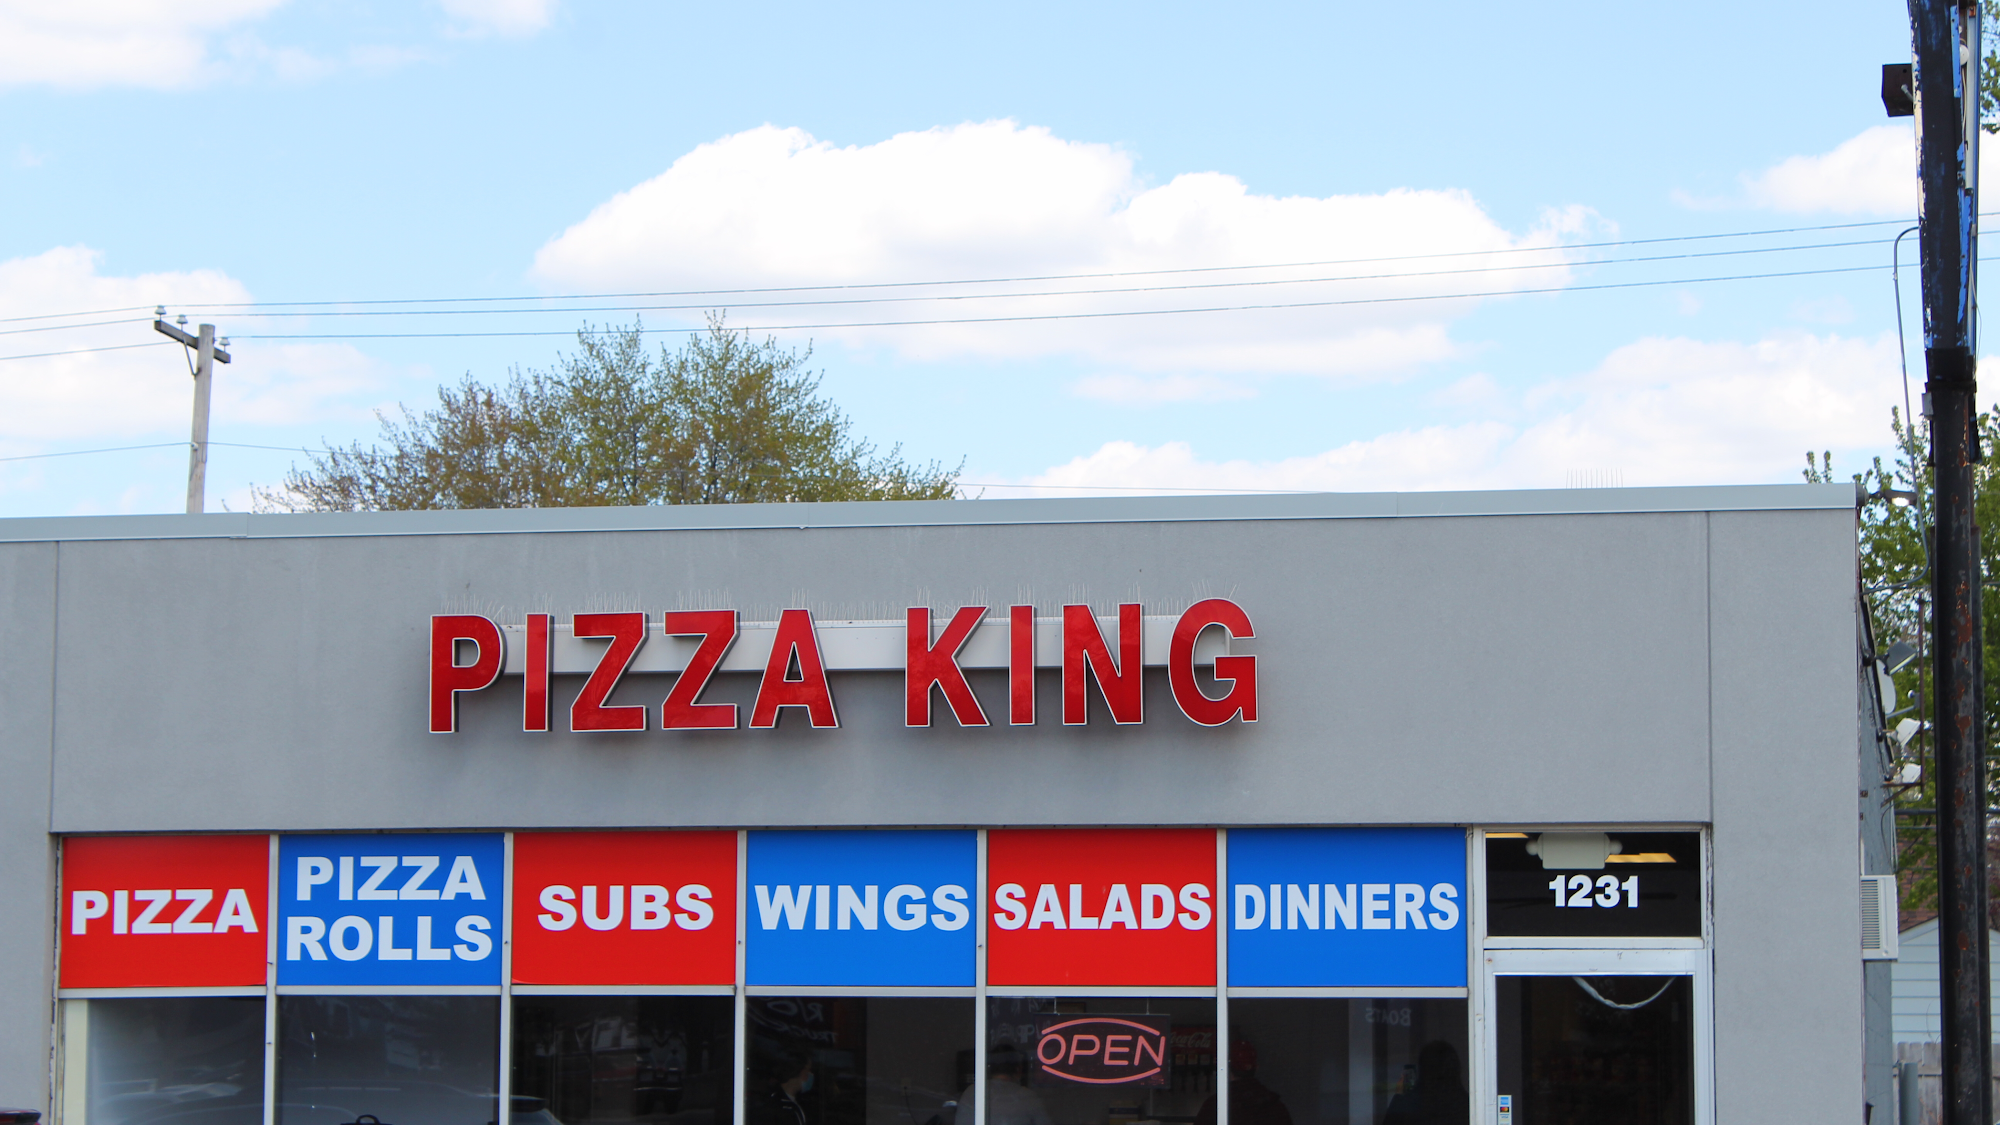 MT's Pizza King